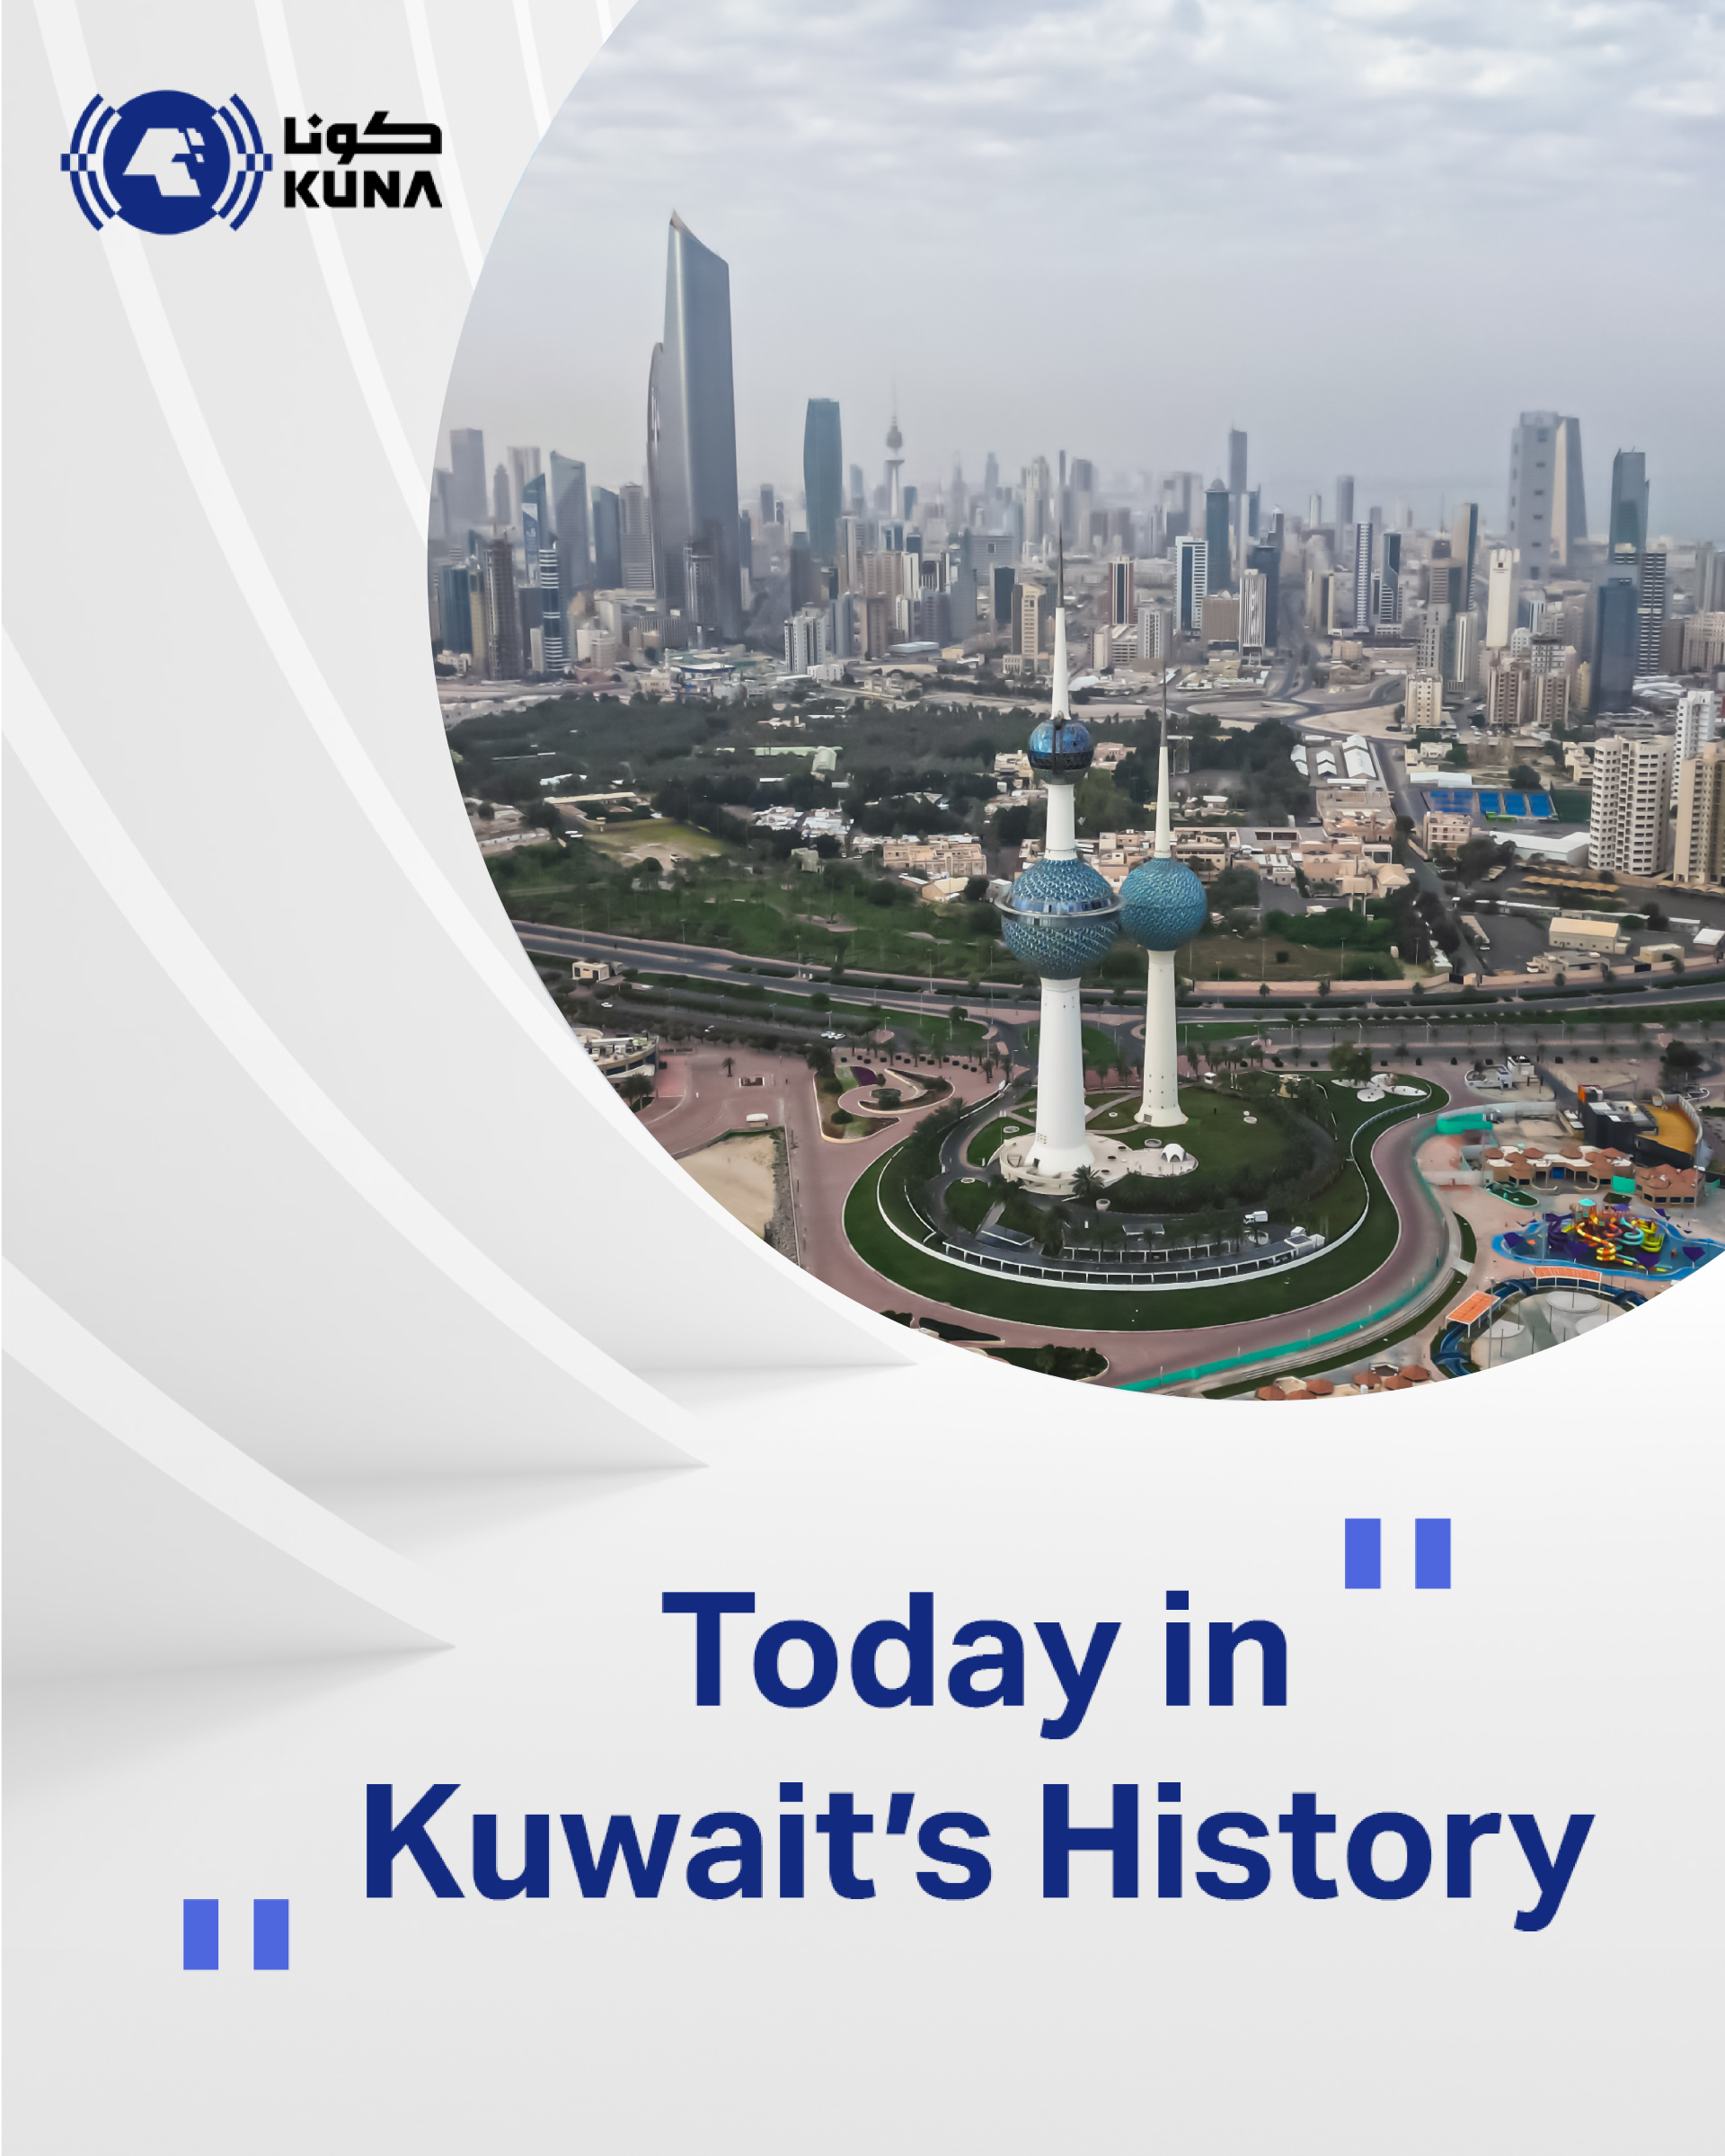 Today in Kuwait's history